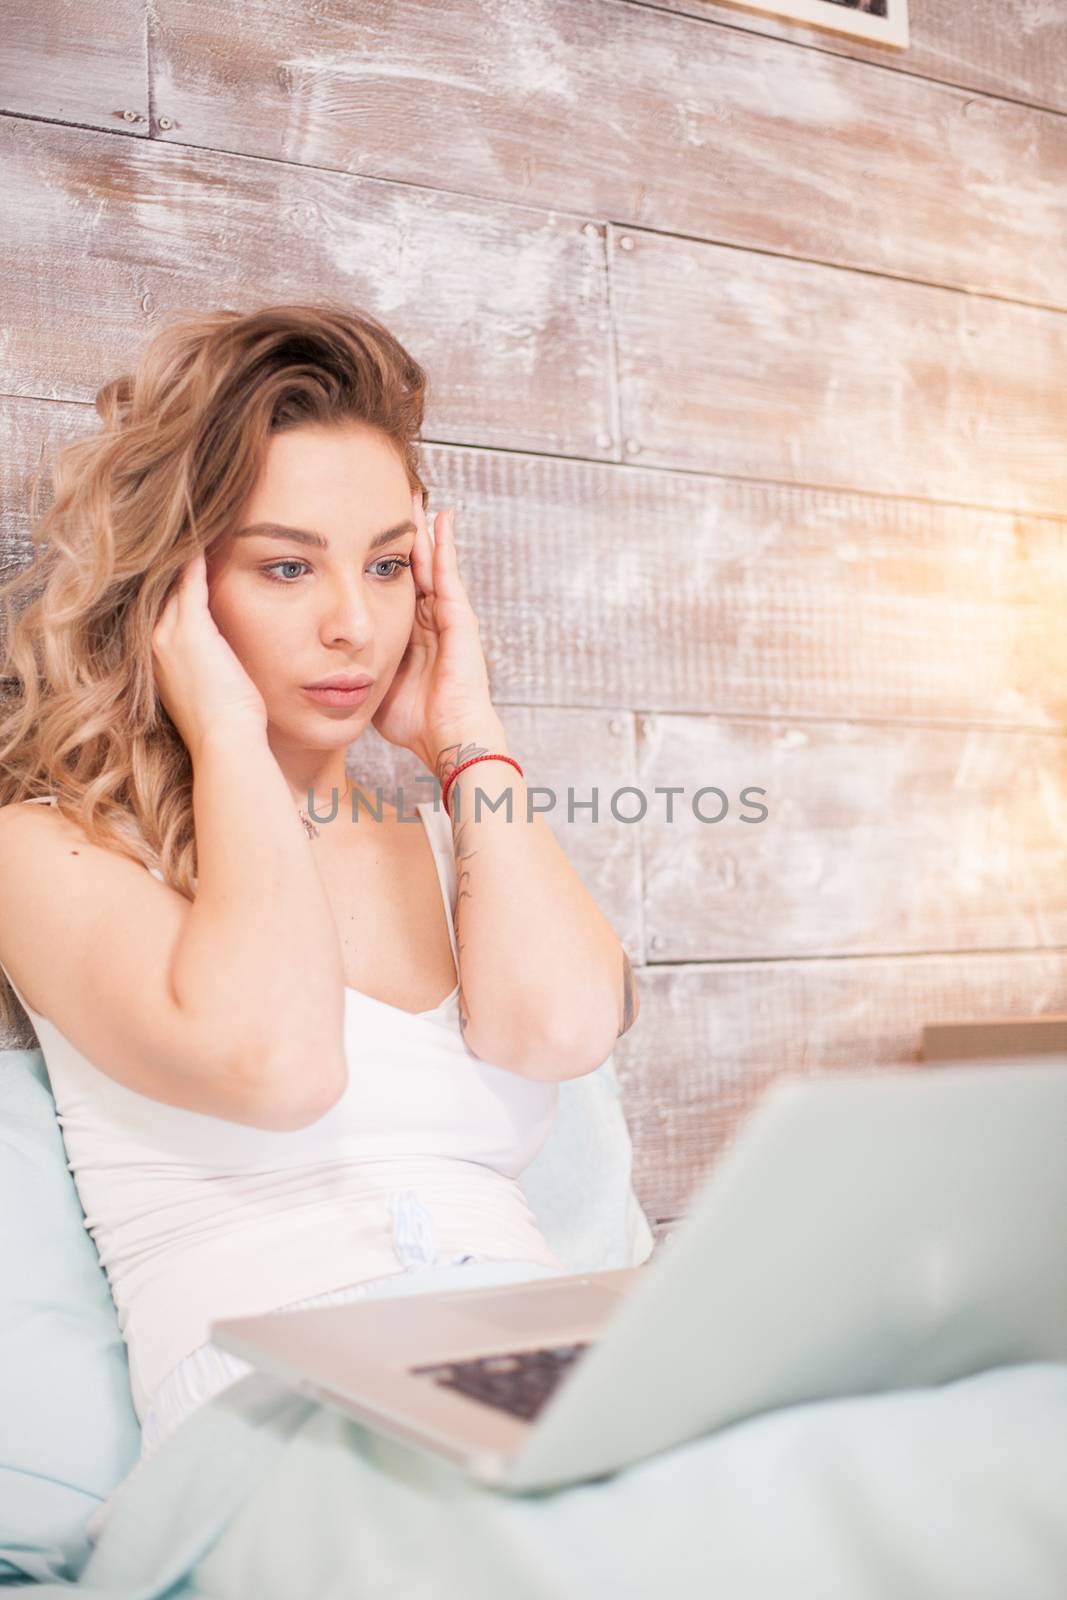 Attractive woman in pajamas having a headache while workin on laptop sitting on bed.